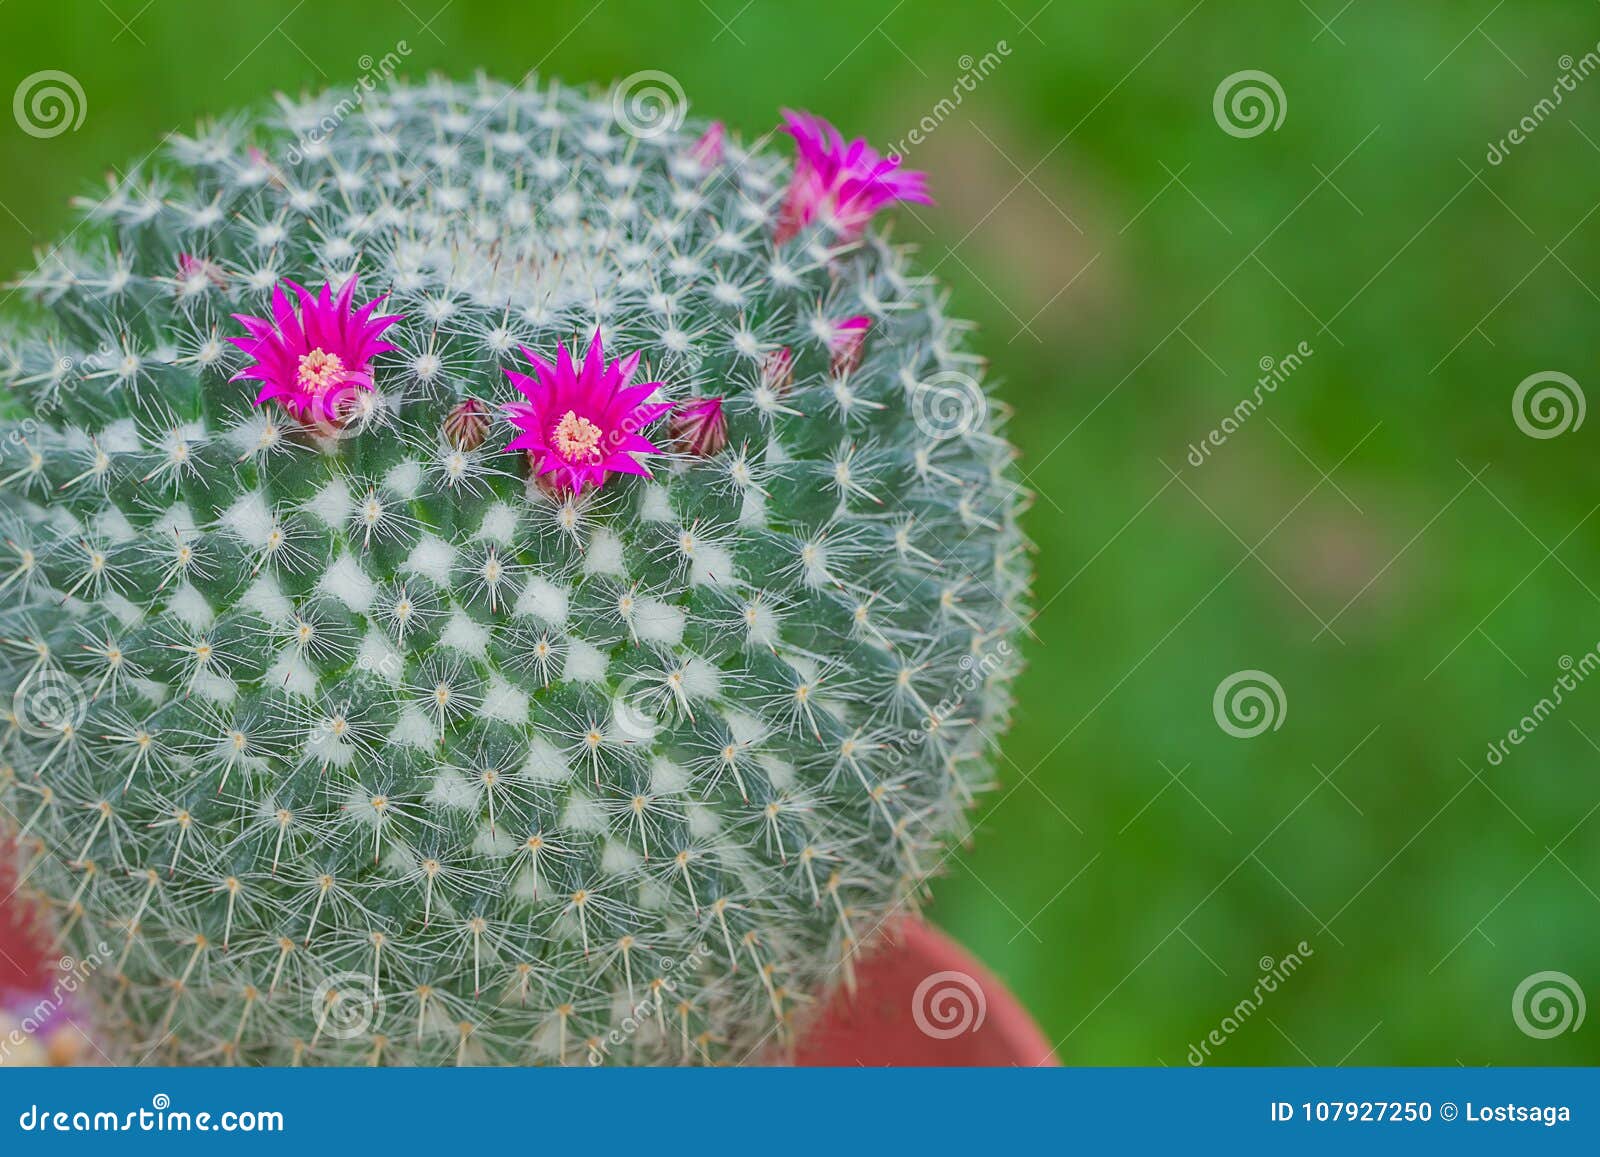 mammilla cactus flower with green background